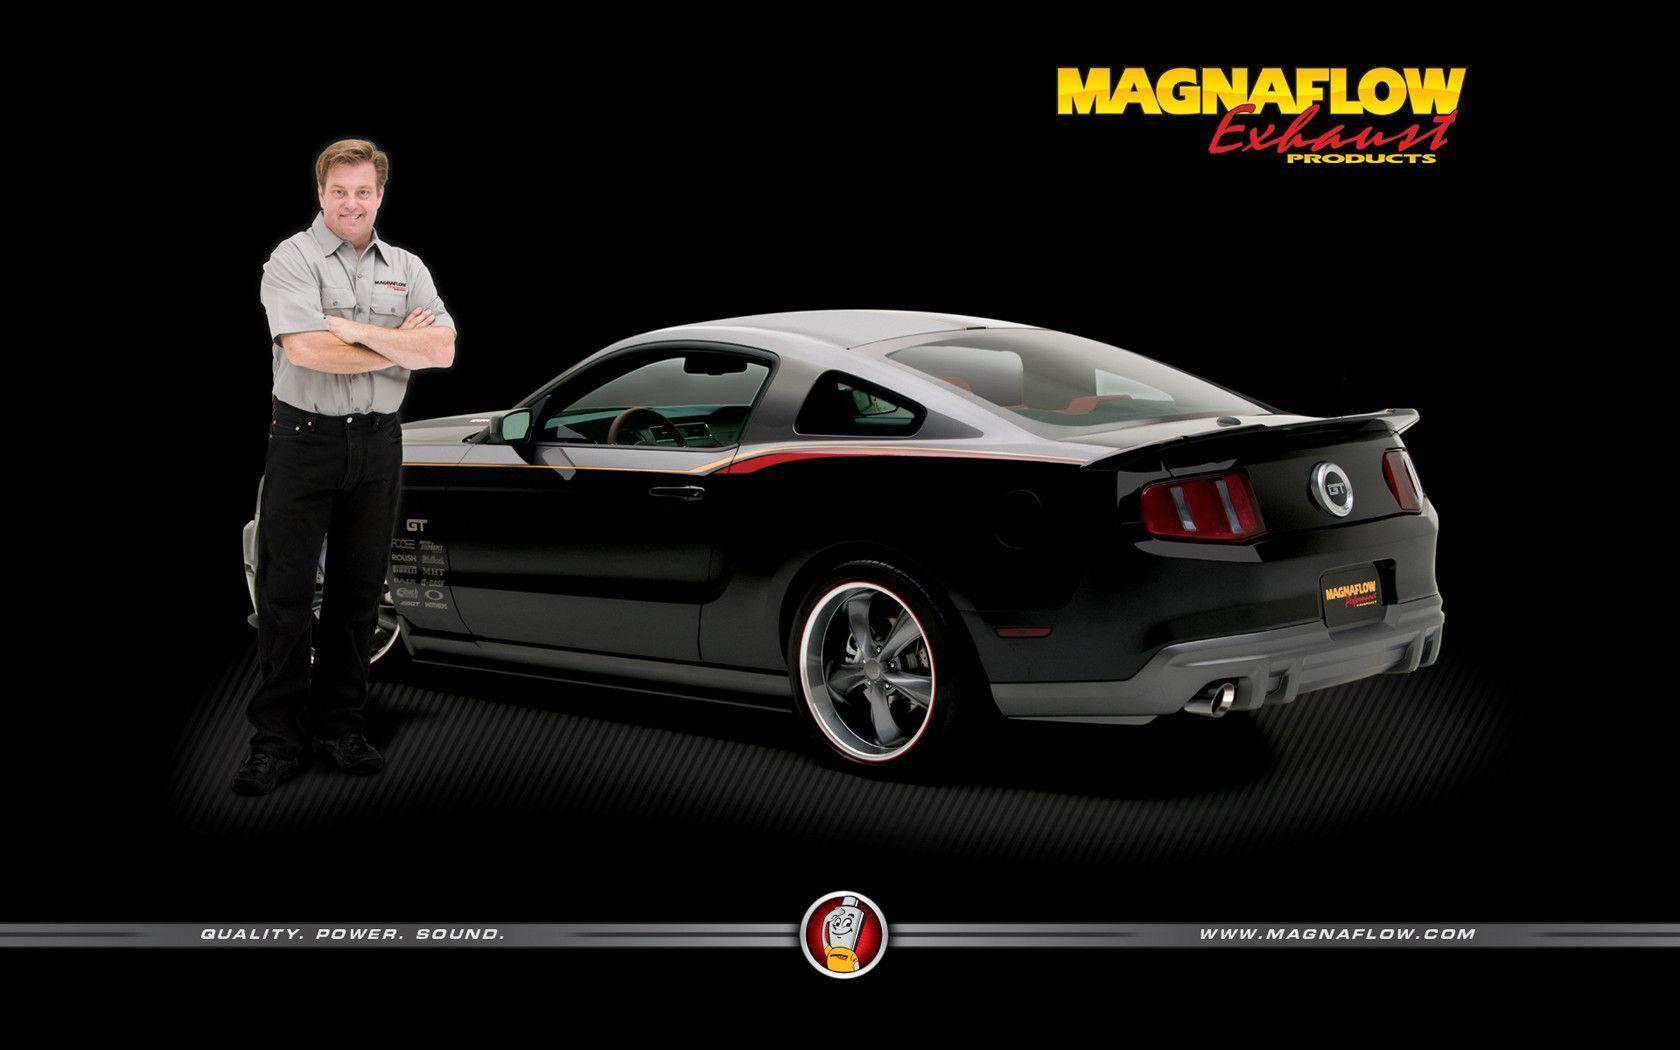 The Official Site of MagnaFlow Exhaust Products Systems